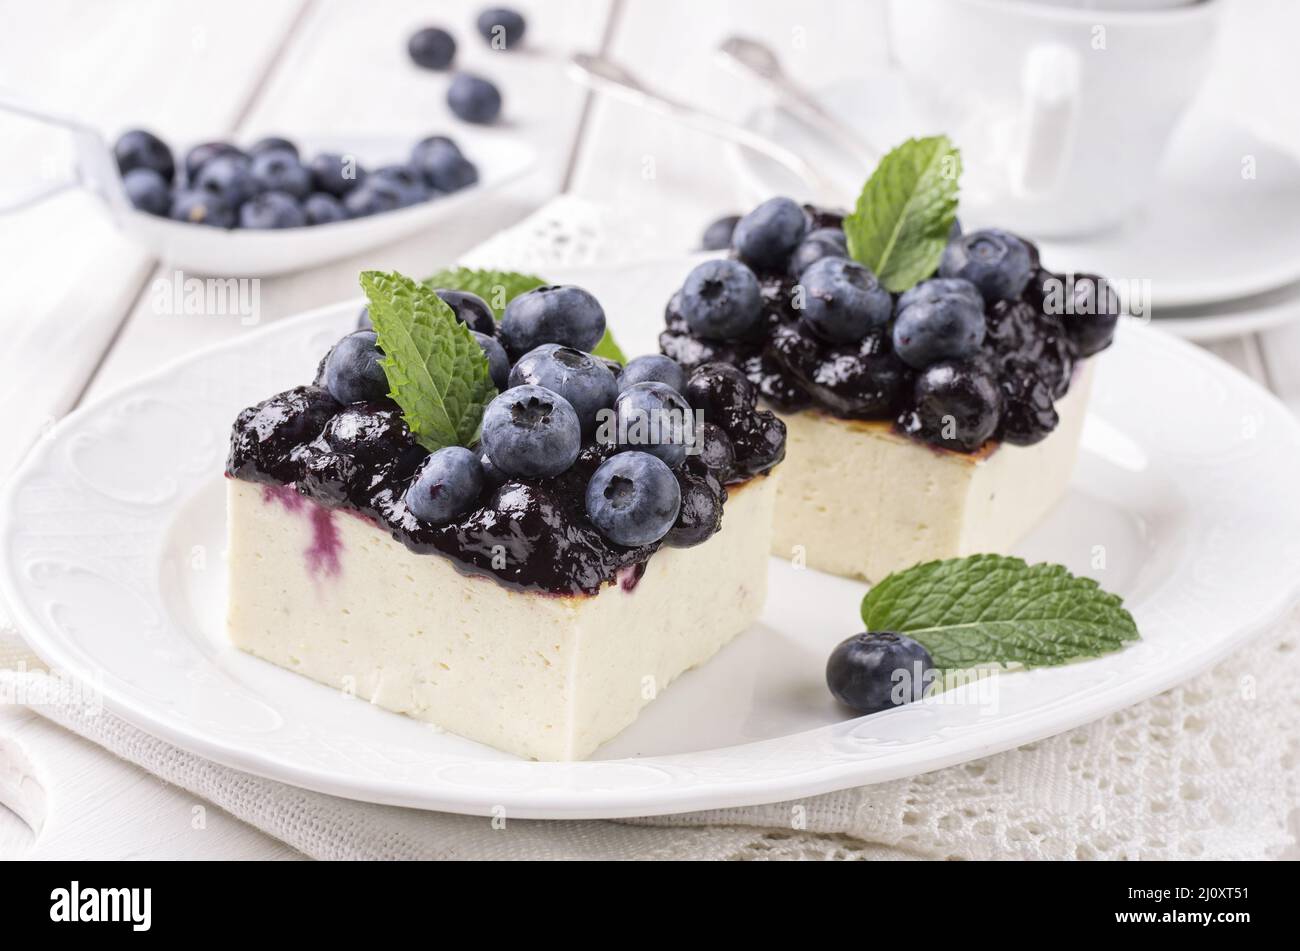 Cheese cake with hackleberries Stock Photo